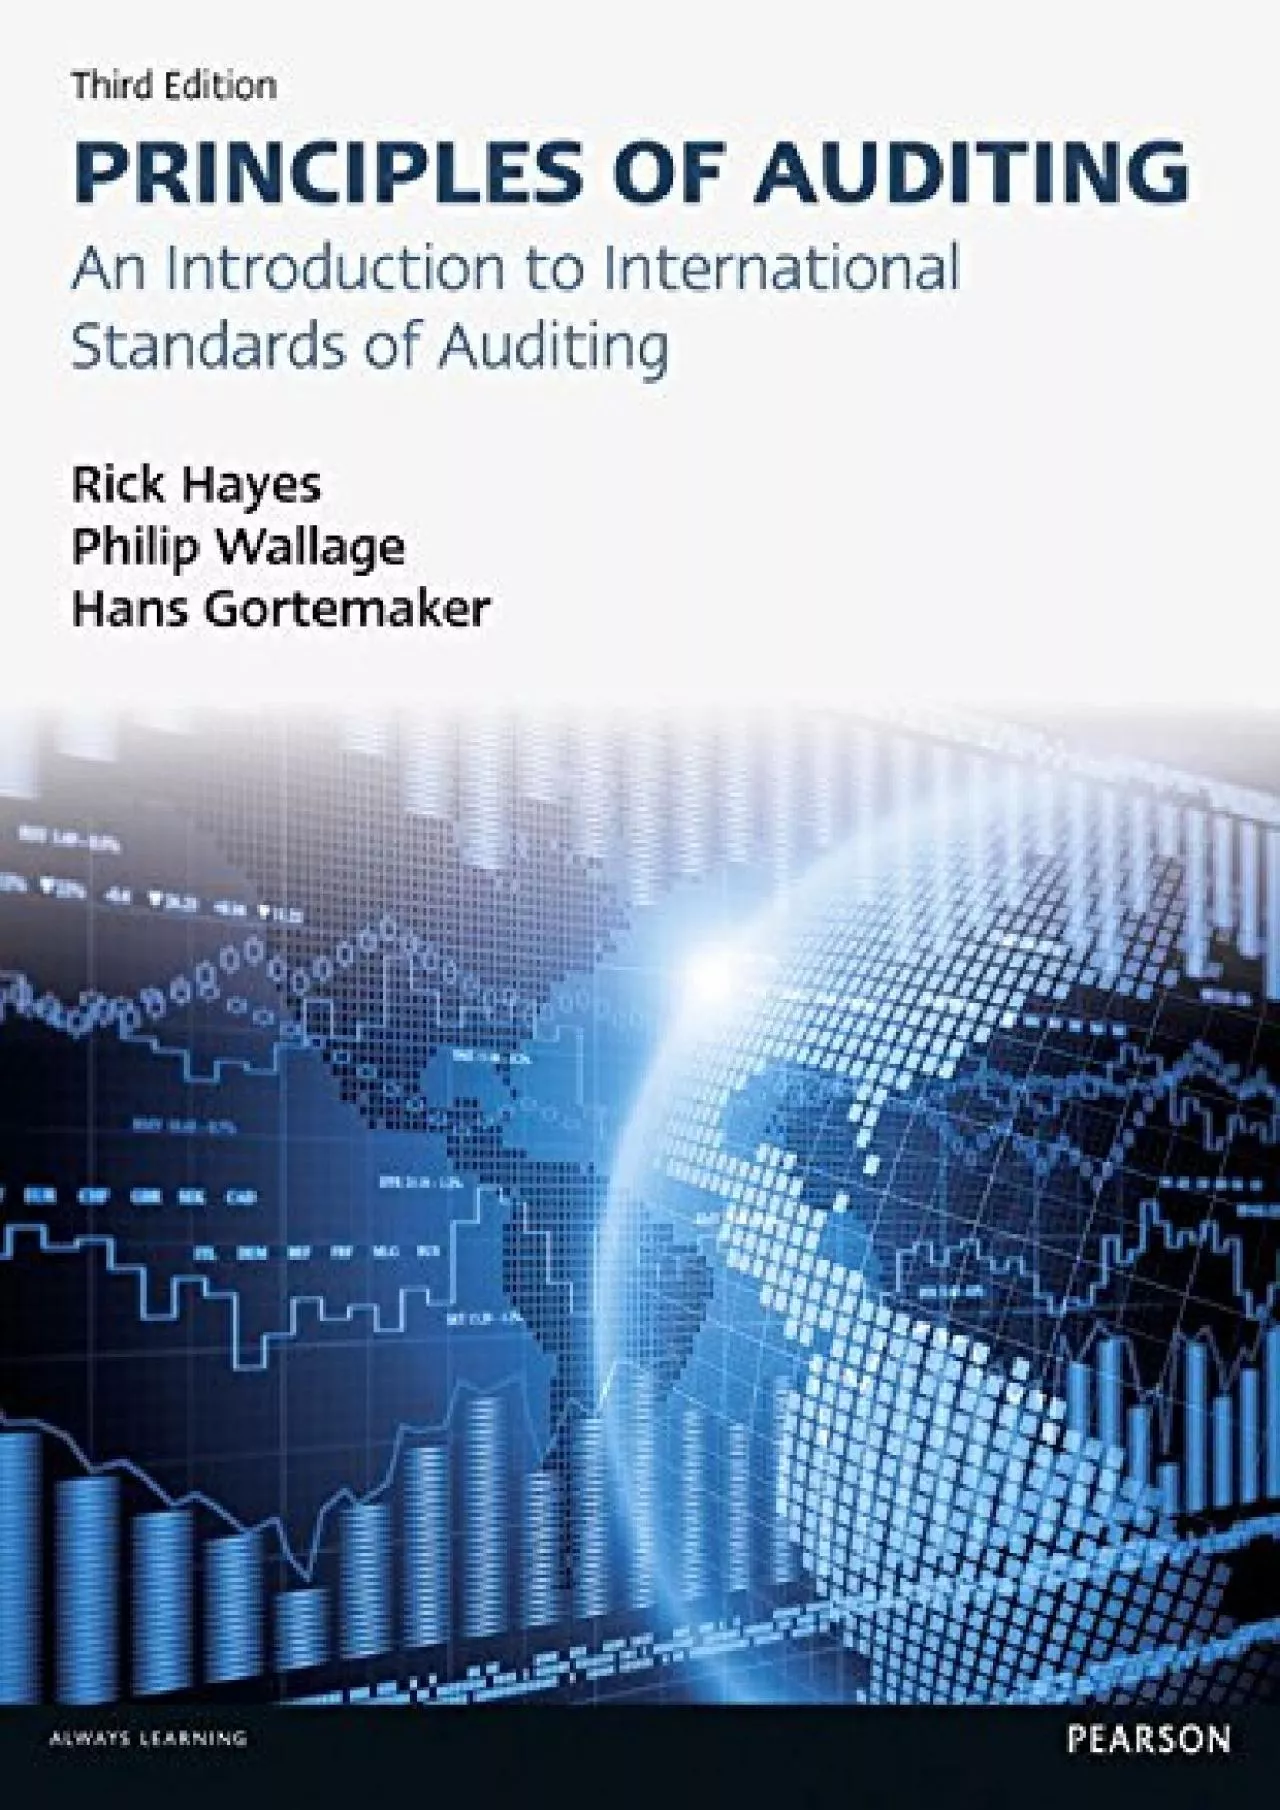 (EBOOK)-Principles of Auditing: An Introduction to International Standards on Auditing